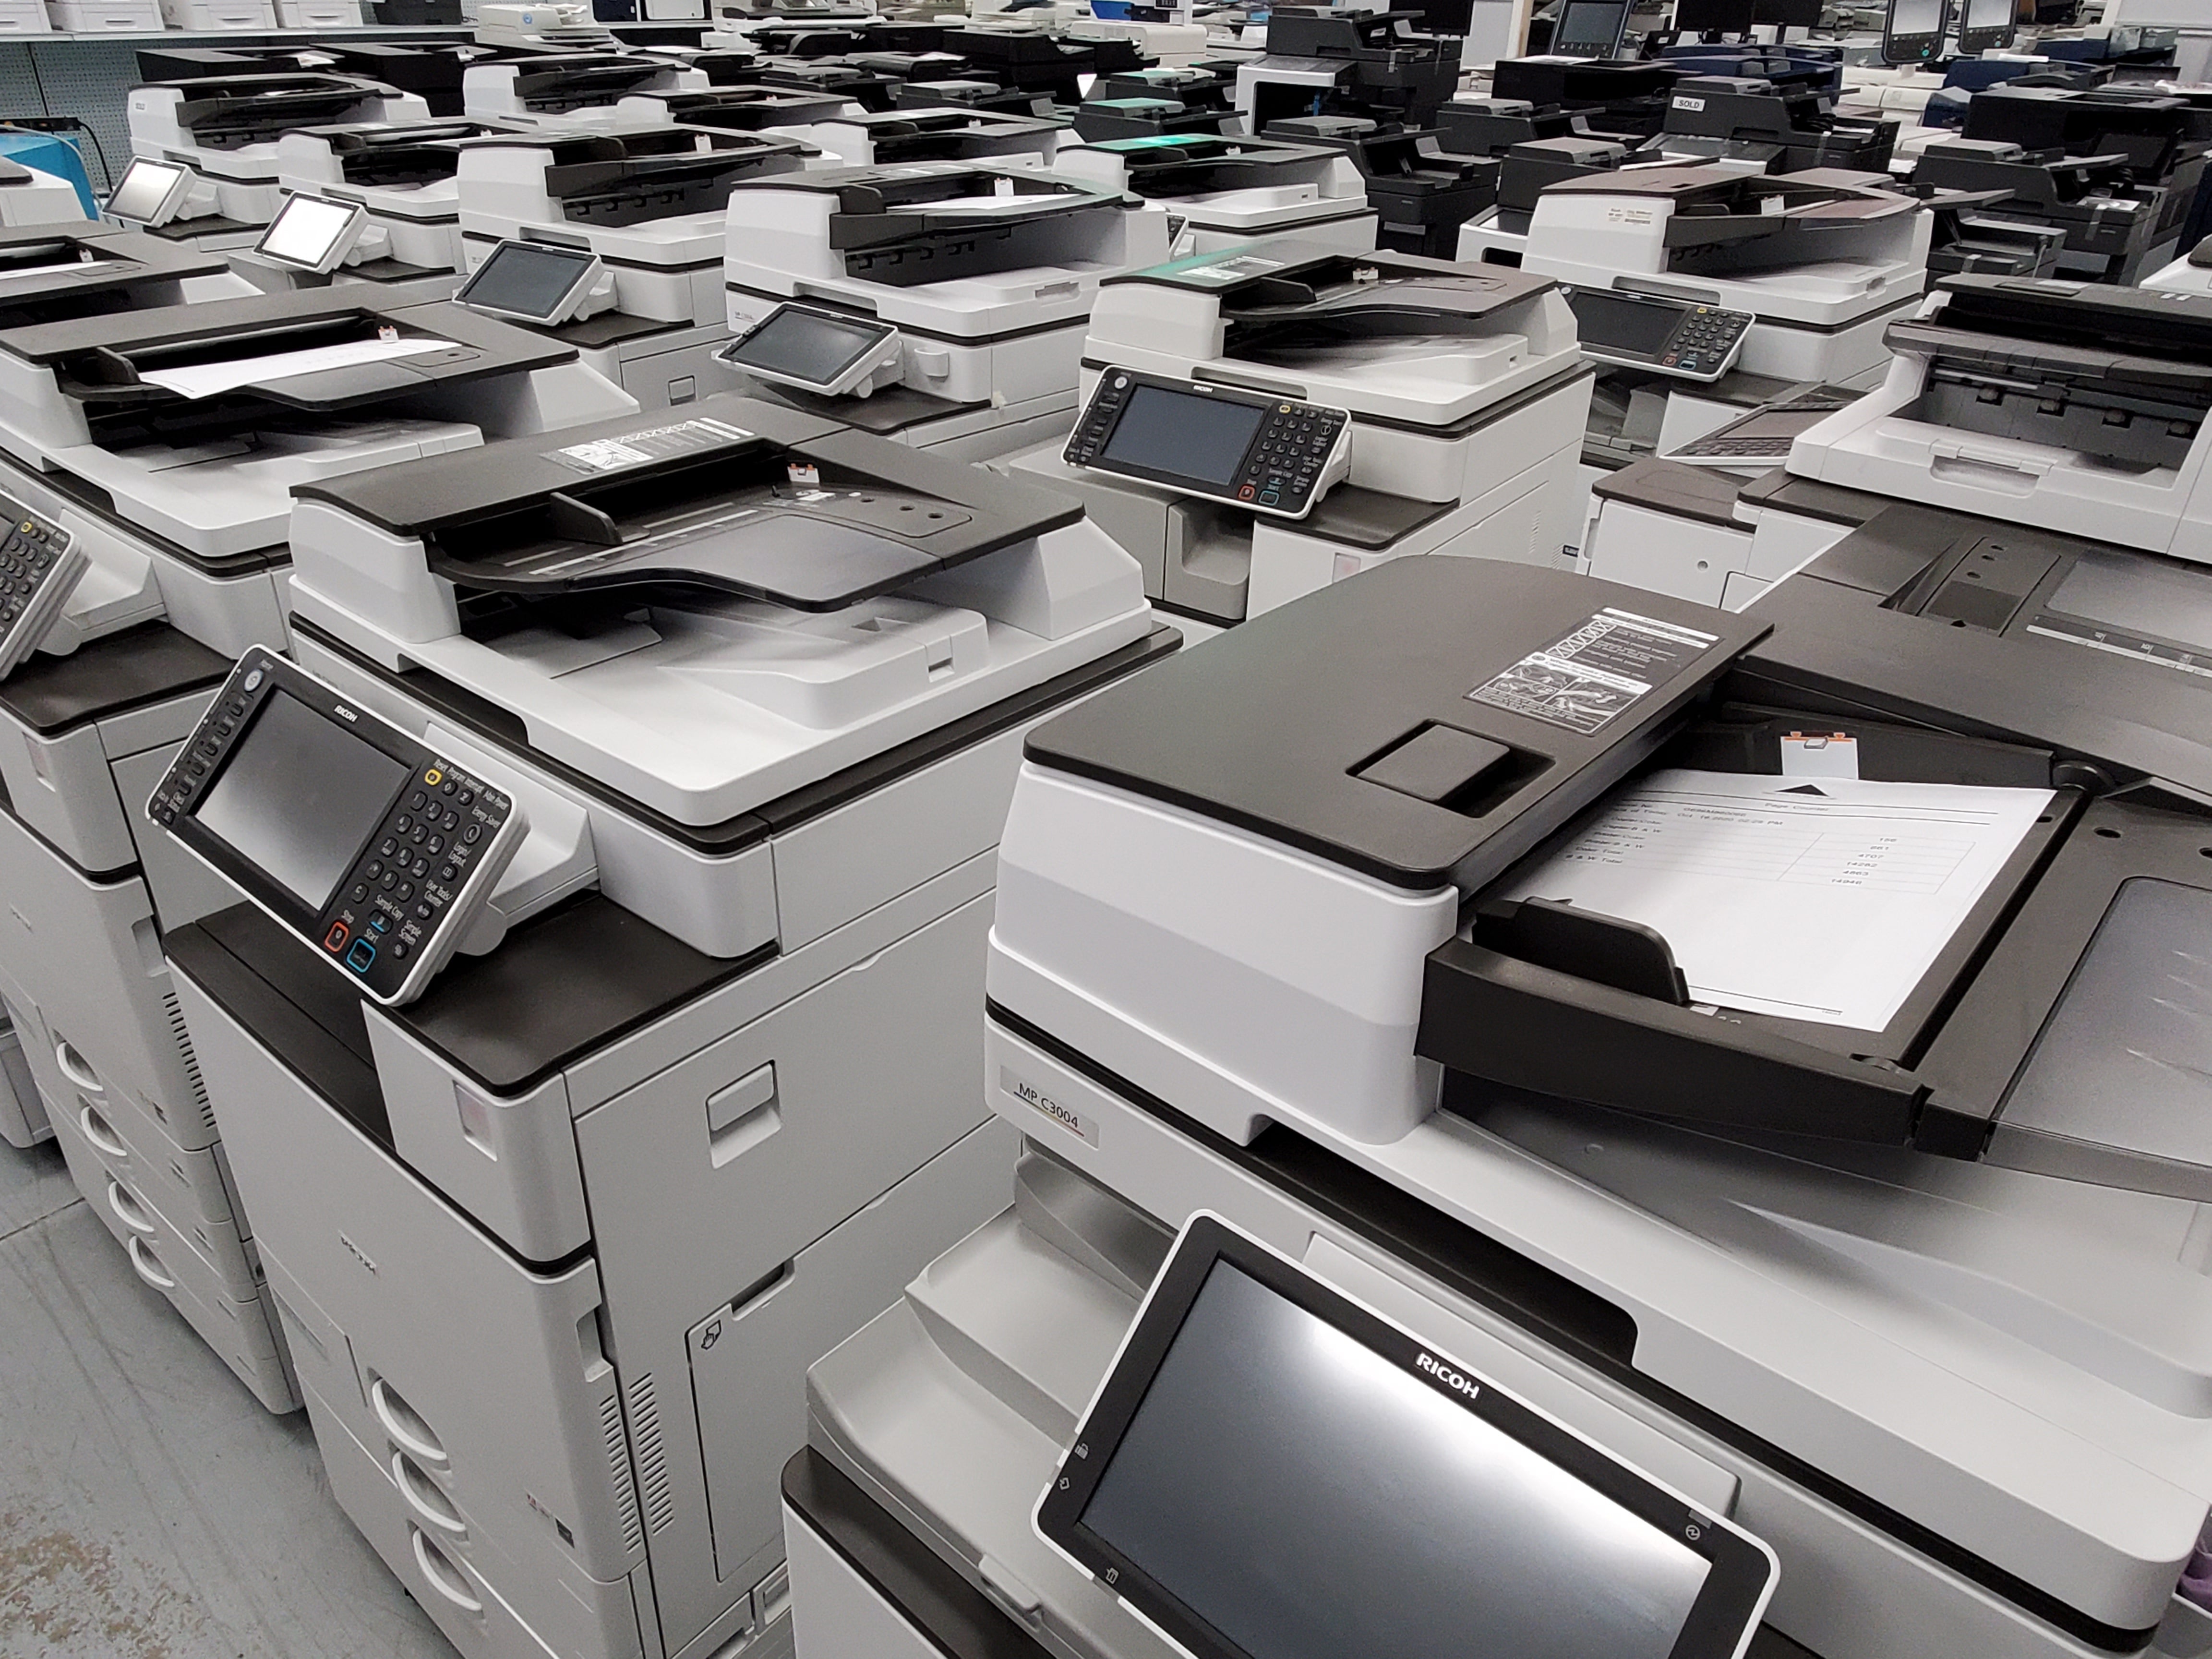 Ricoh Copiers News - It Looks Like The CEO of Ricoh Germany Just Got Replaced.